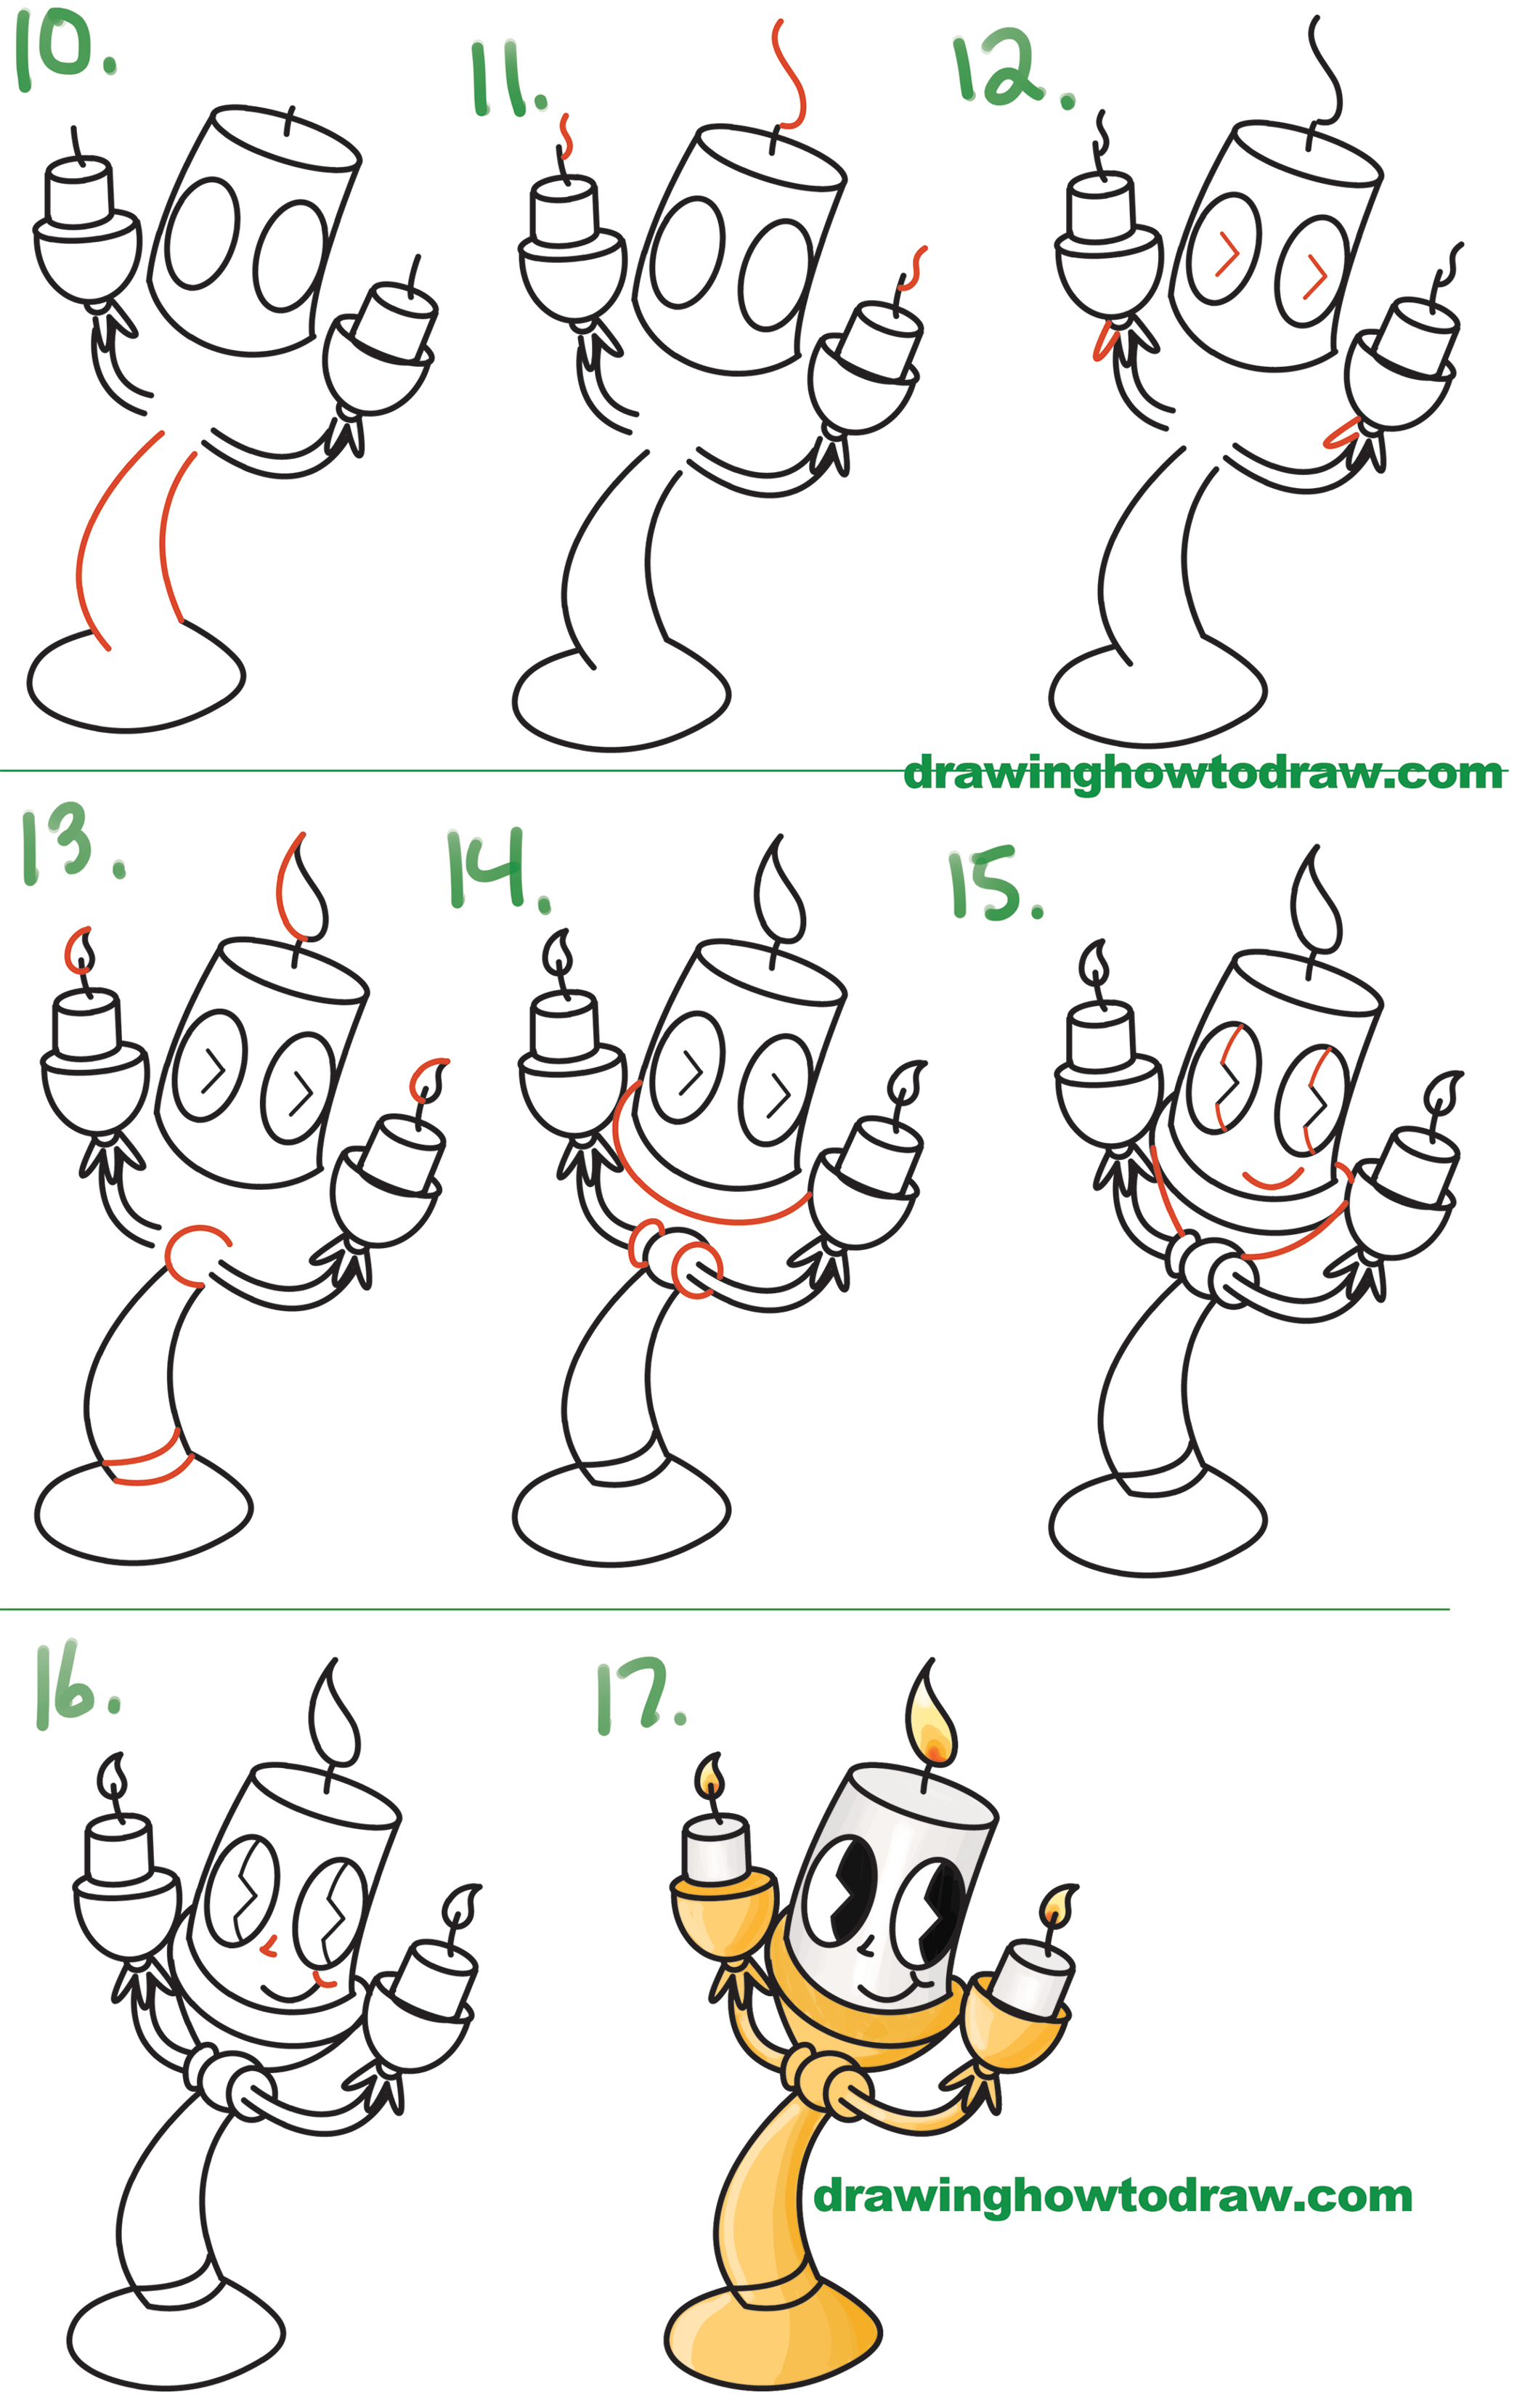 Learn How to Draw Lumiere (Cute Kawaii / Chibi) from Beauty and the Beast Simple Steps Drawing Lesson for Children and Beginners